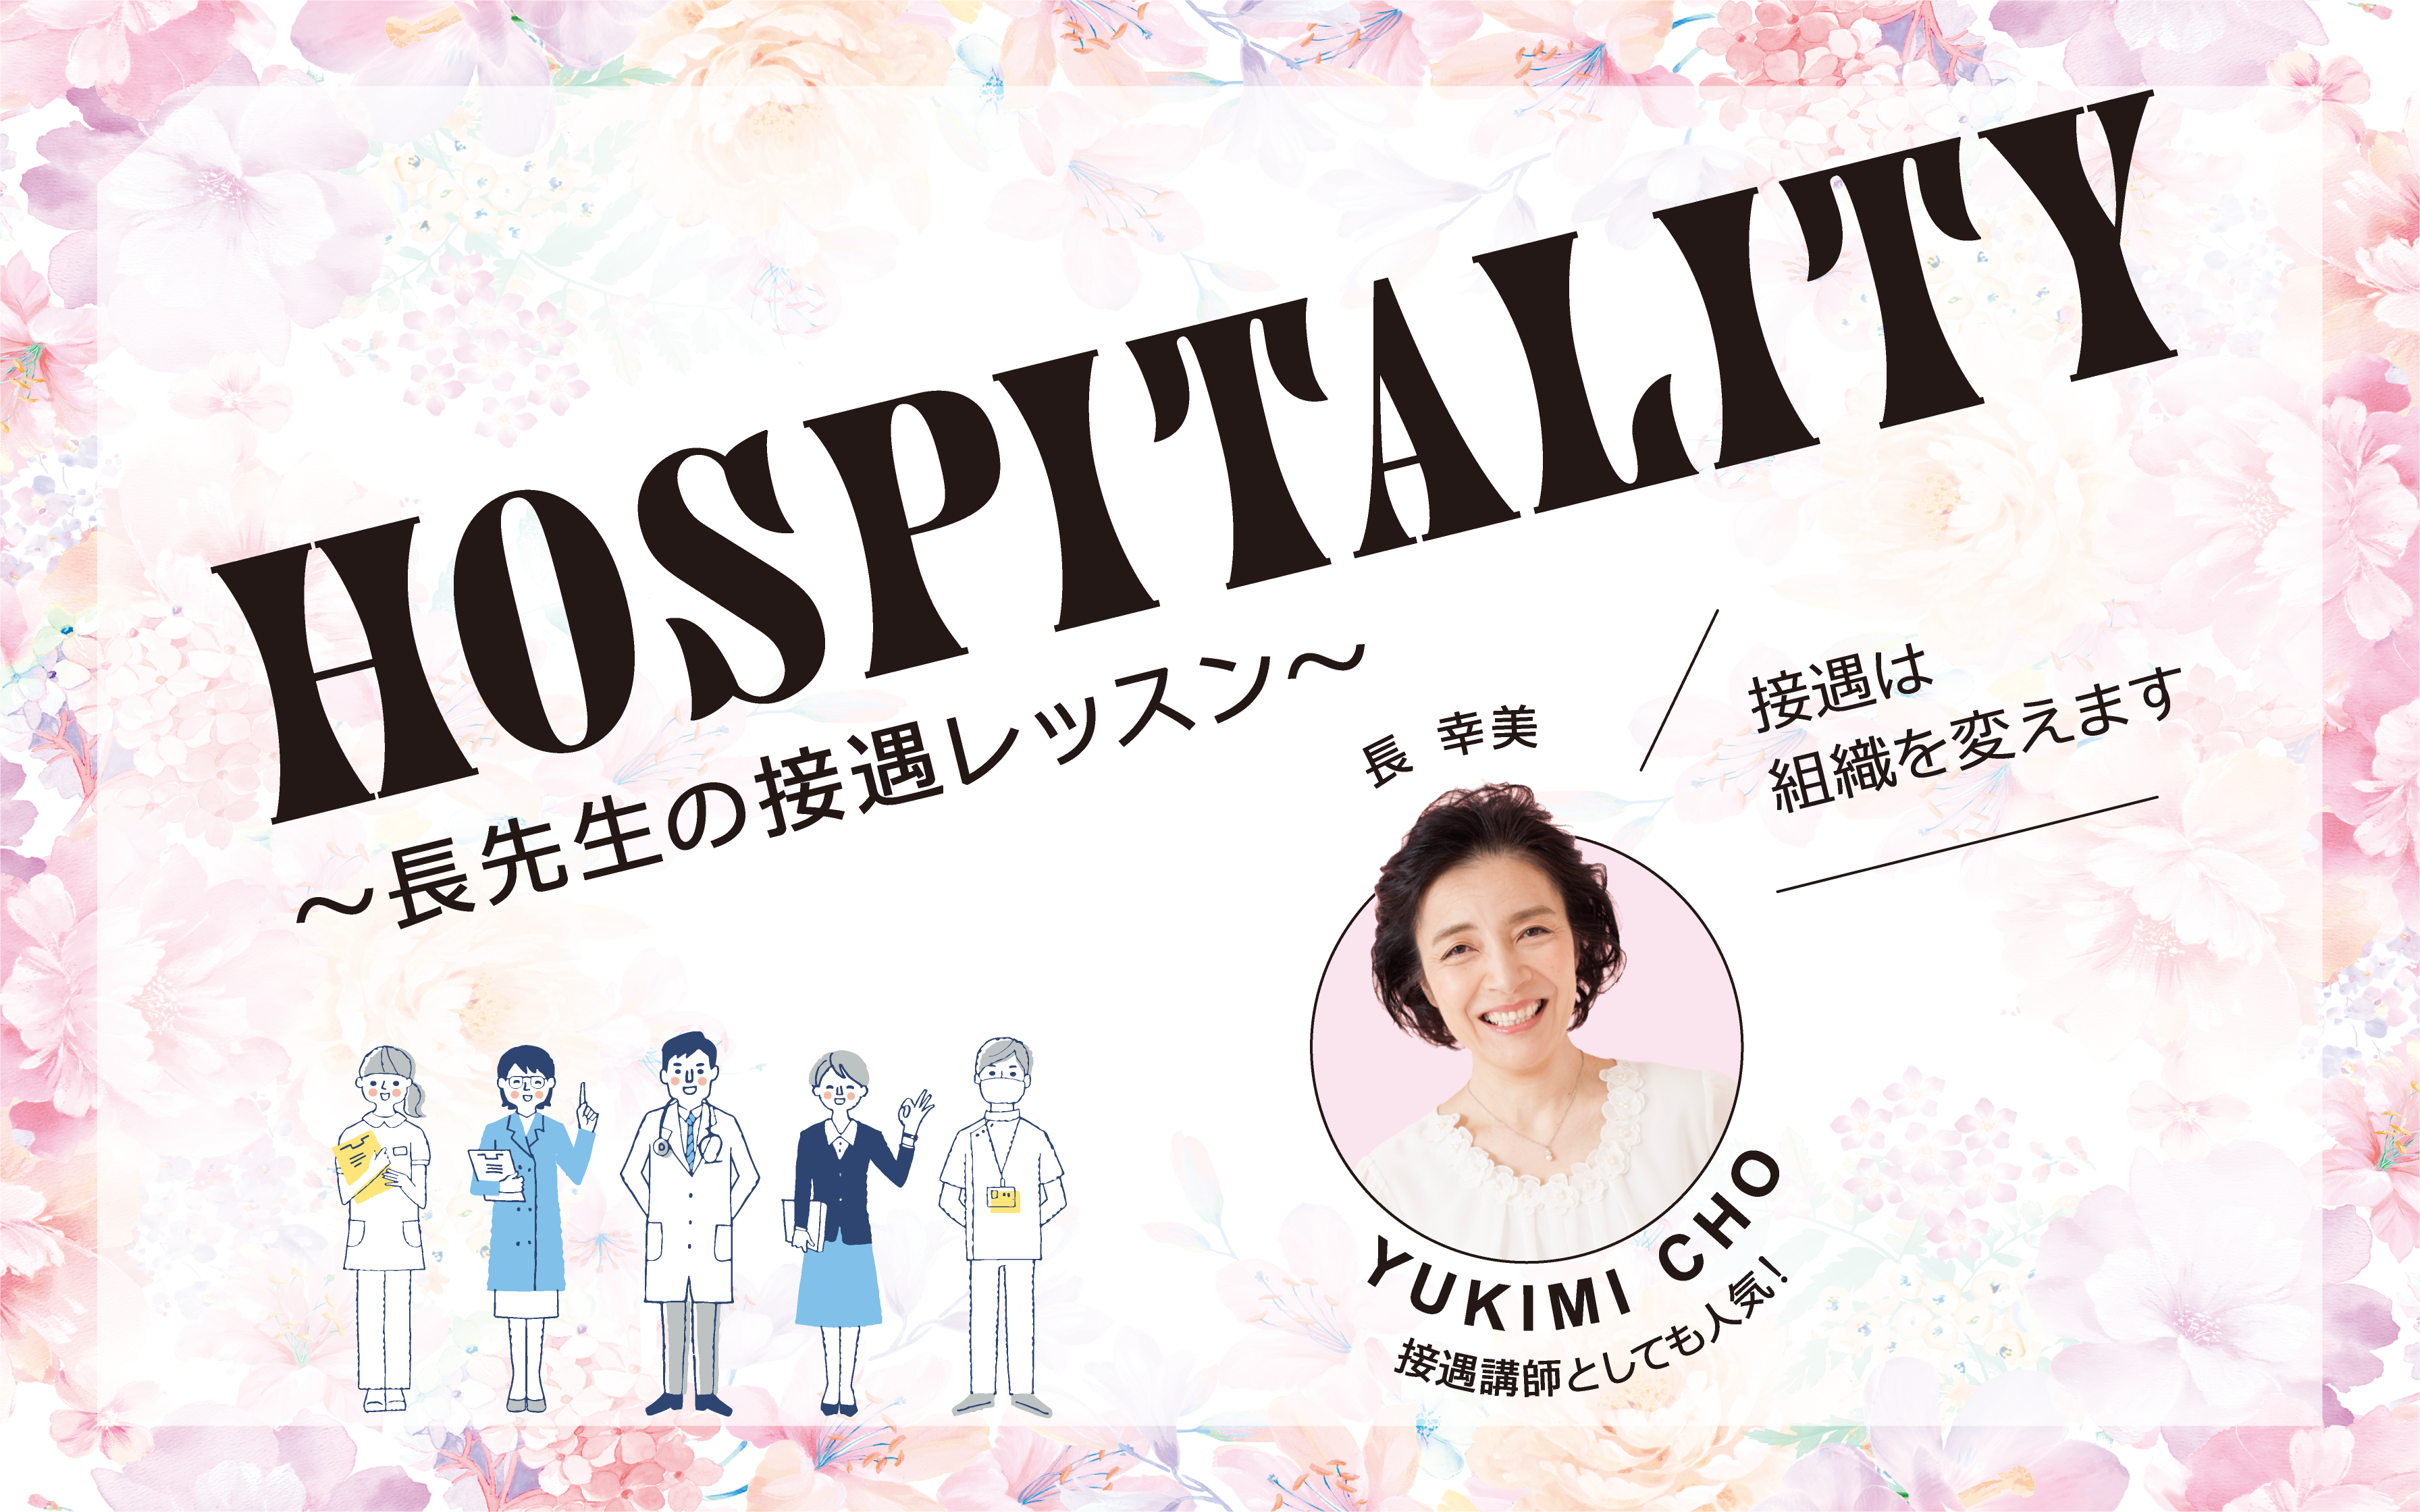 You are currently viewing HOSPITALITY 〜長先生の接遇レッスン〜 VOL.34　初心忘るべからず